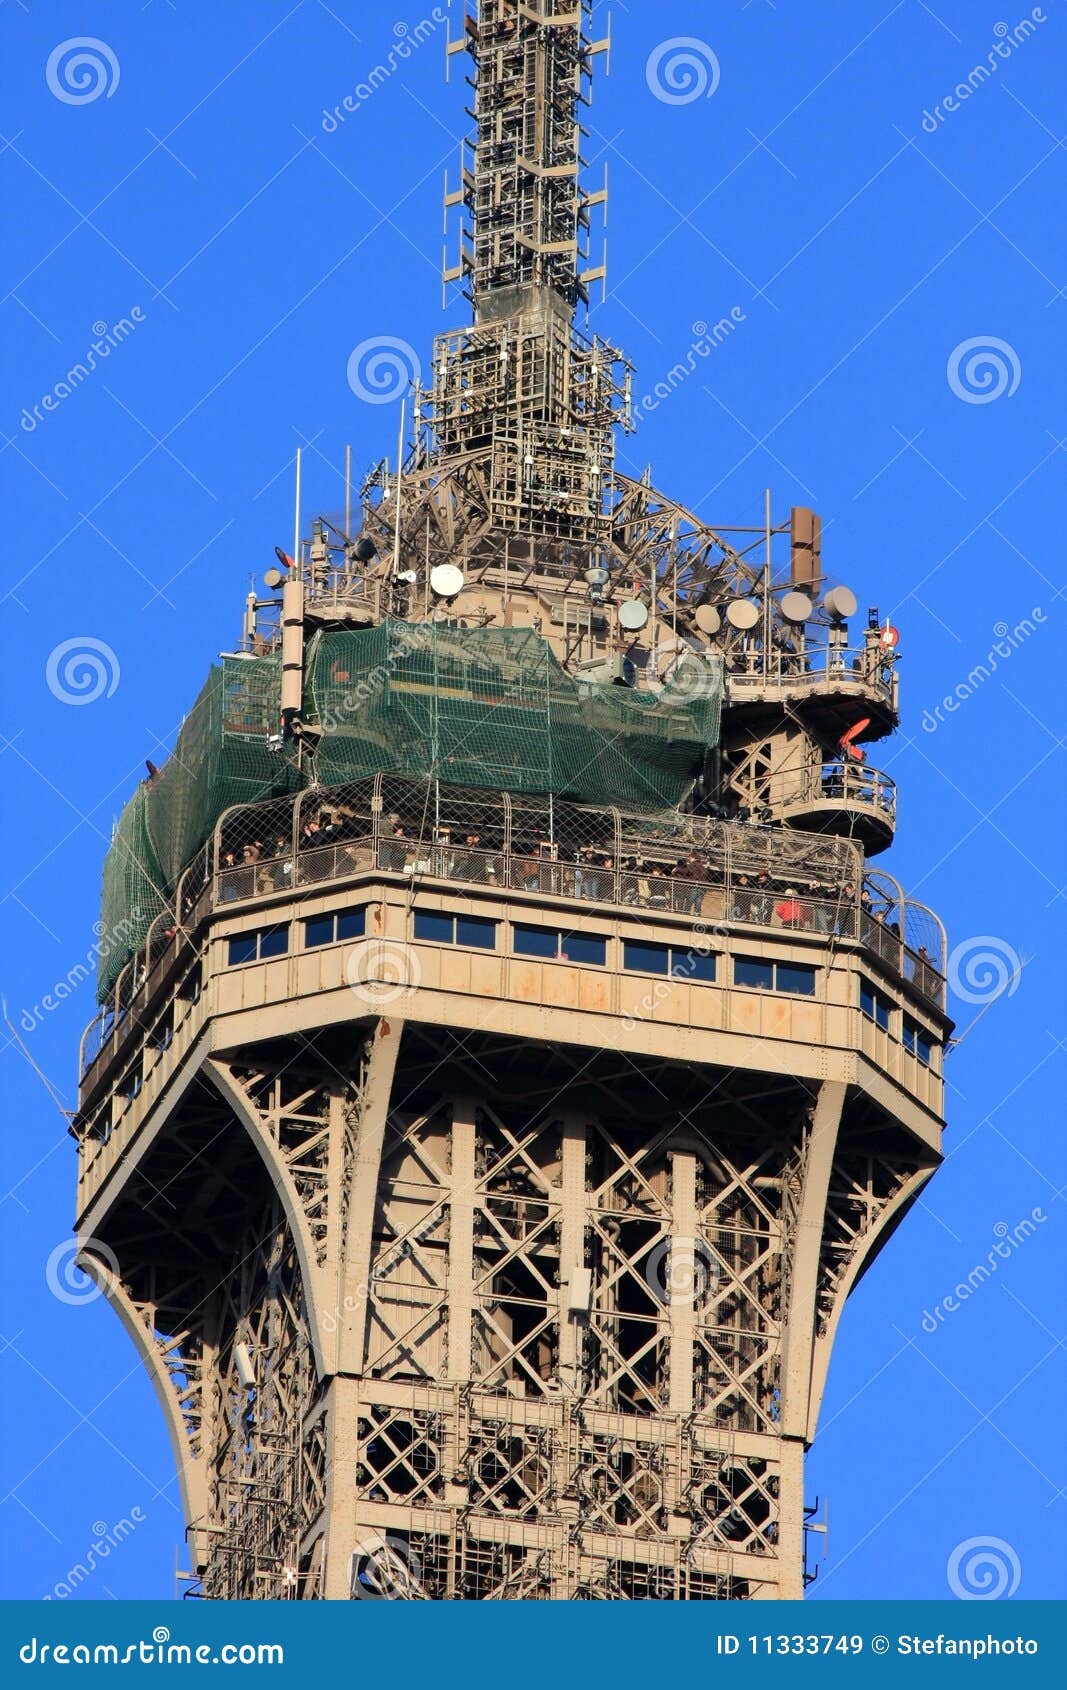 The Top Level of Eiffel Stock Image - Image of antenna, 11333749